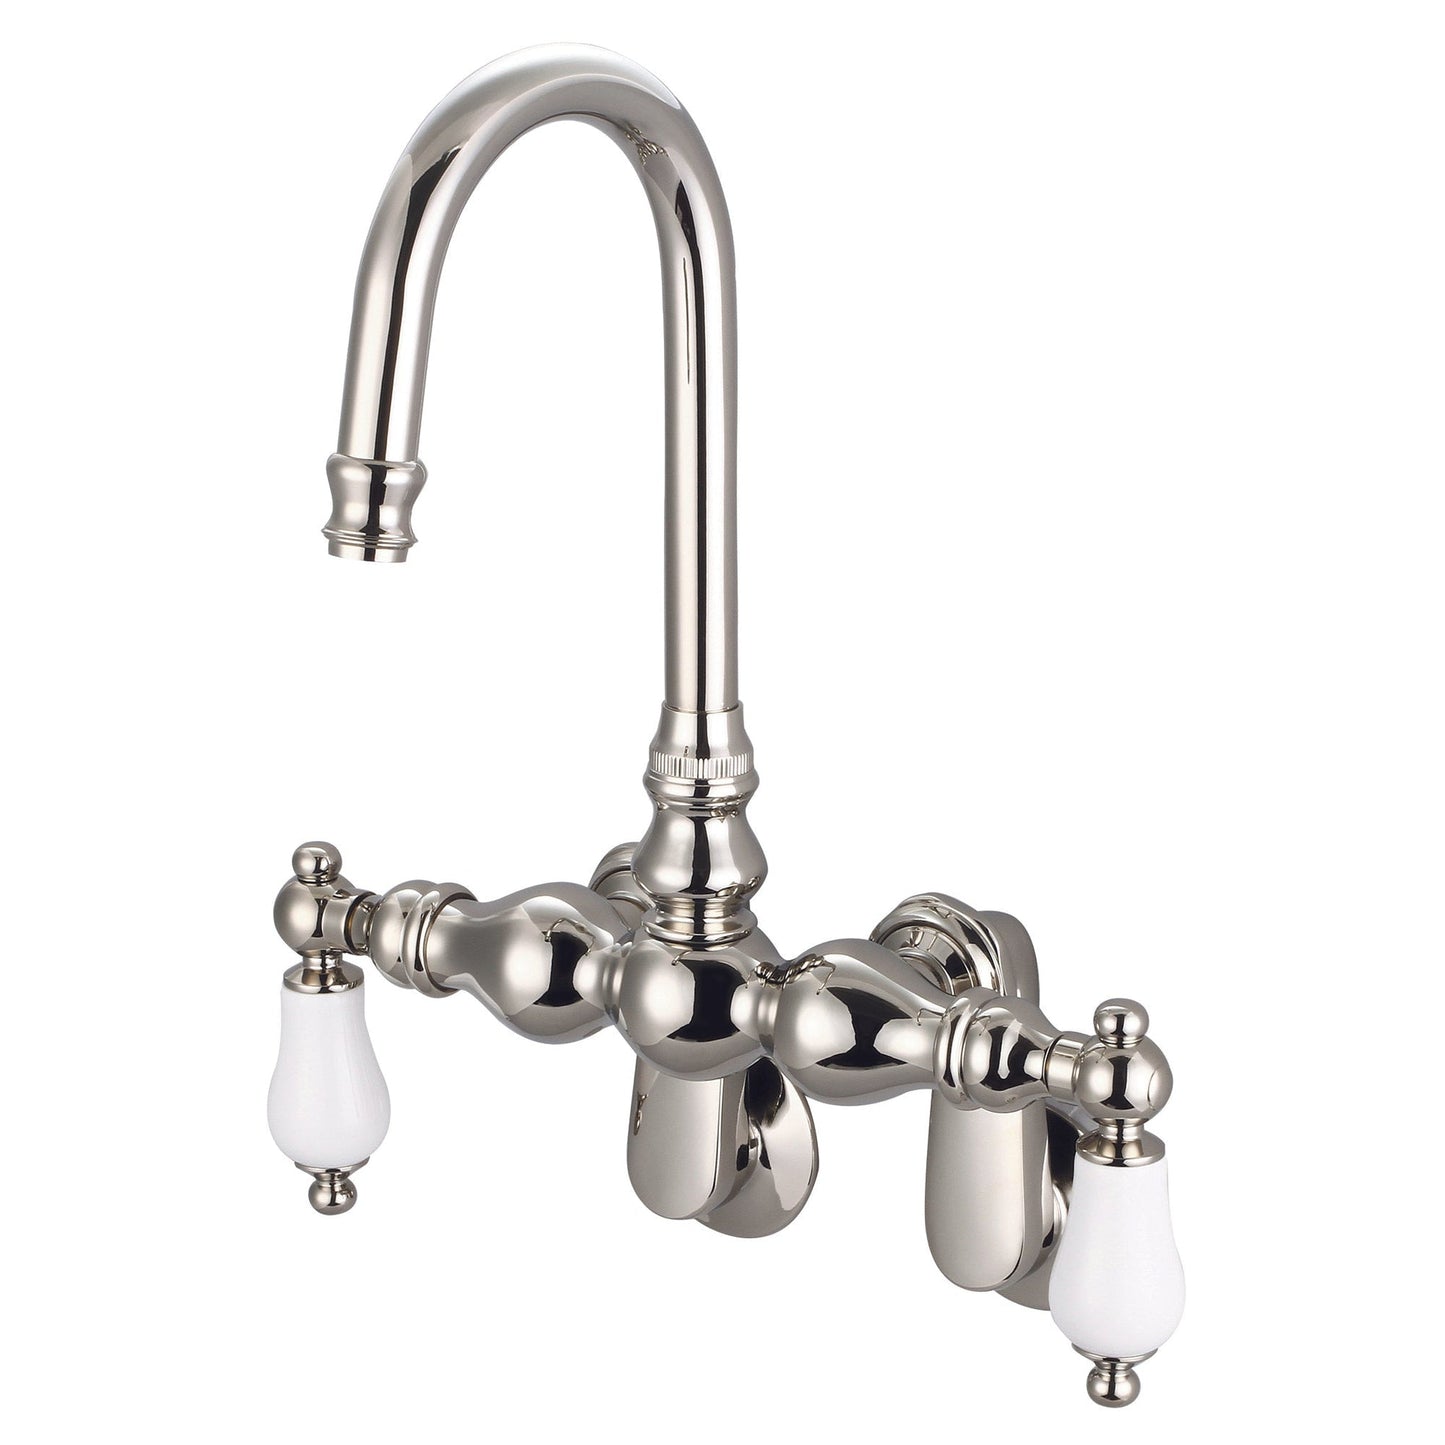 Water Creation Vintage Classic Adjustable Spread Wall Mount Tub F6-0015 9.25" Ivory Solid Brass Faucet With Gooseneck Spout And Swivel Wall Connector And Porcelain Lever Handles Without Labels